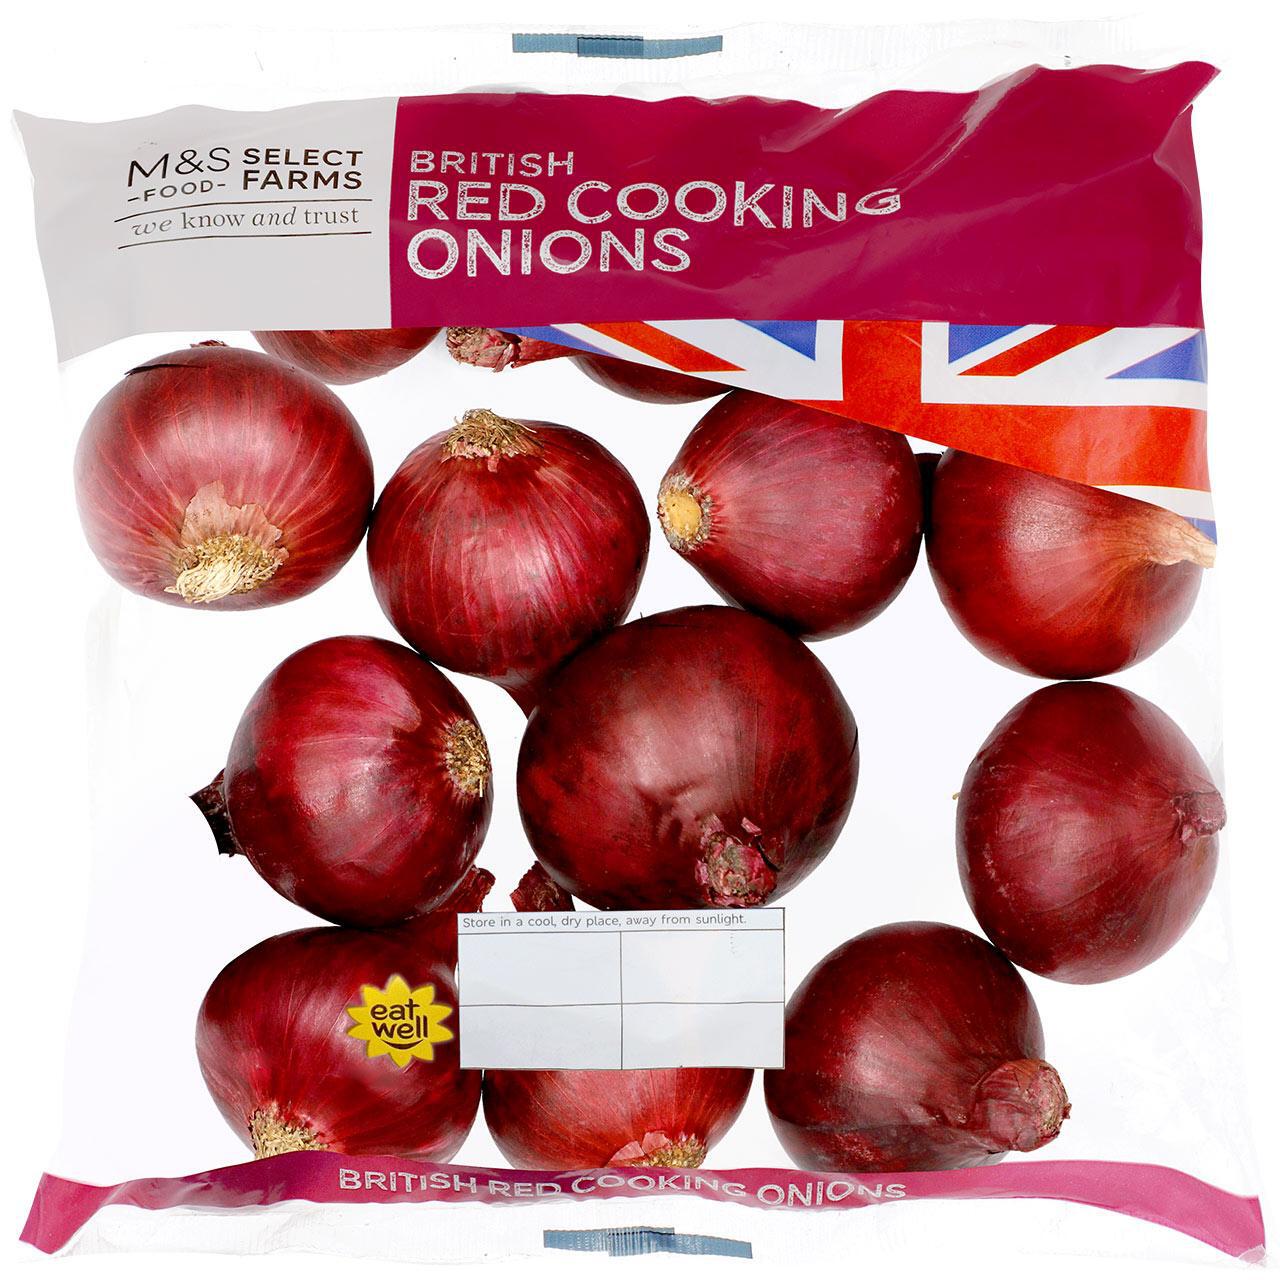 M&S Red Cooking Onions 1kg